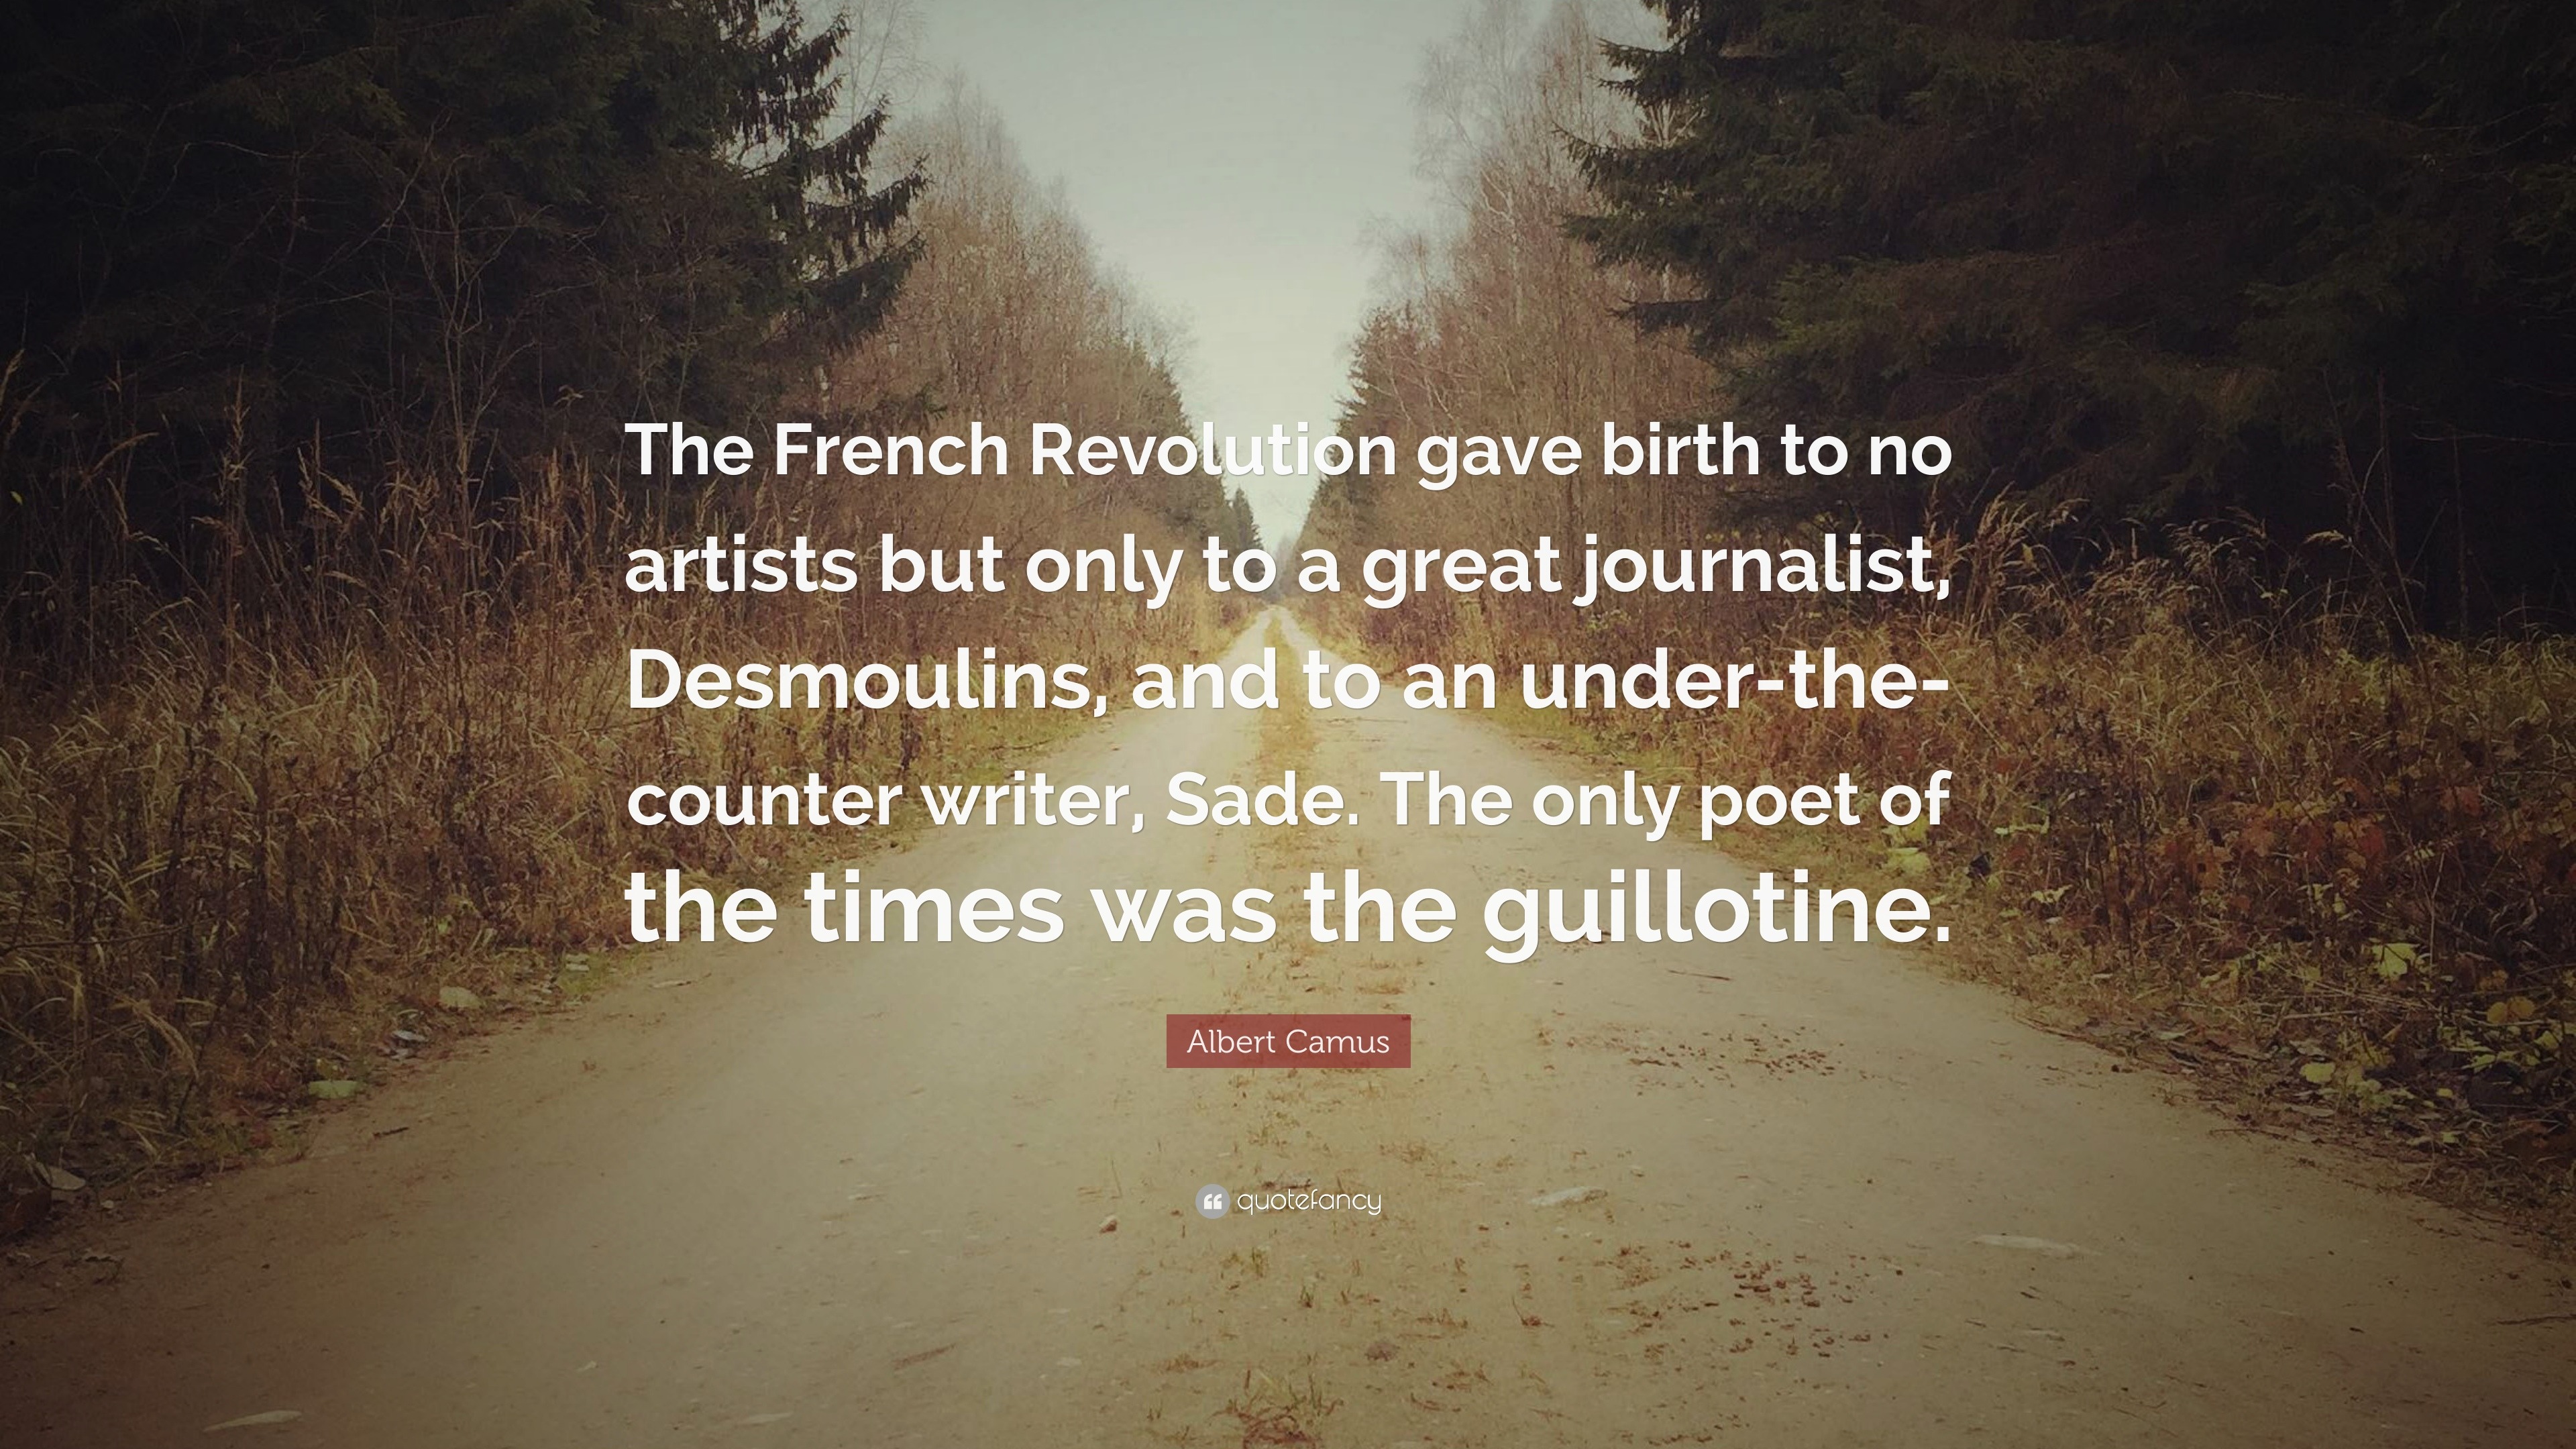 66423 Albert Camus Quote The French Revolution gave birth to no artists